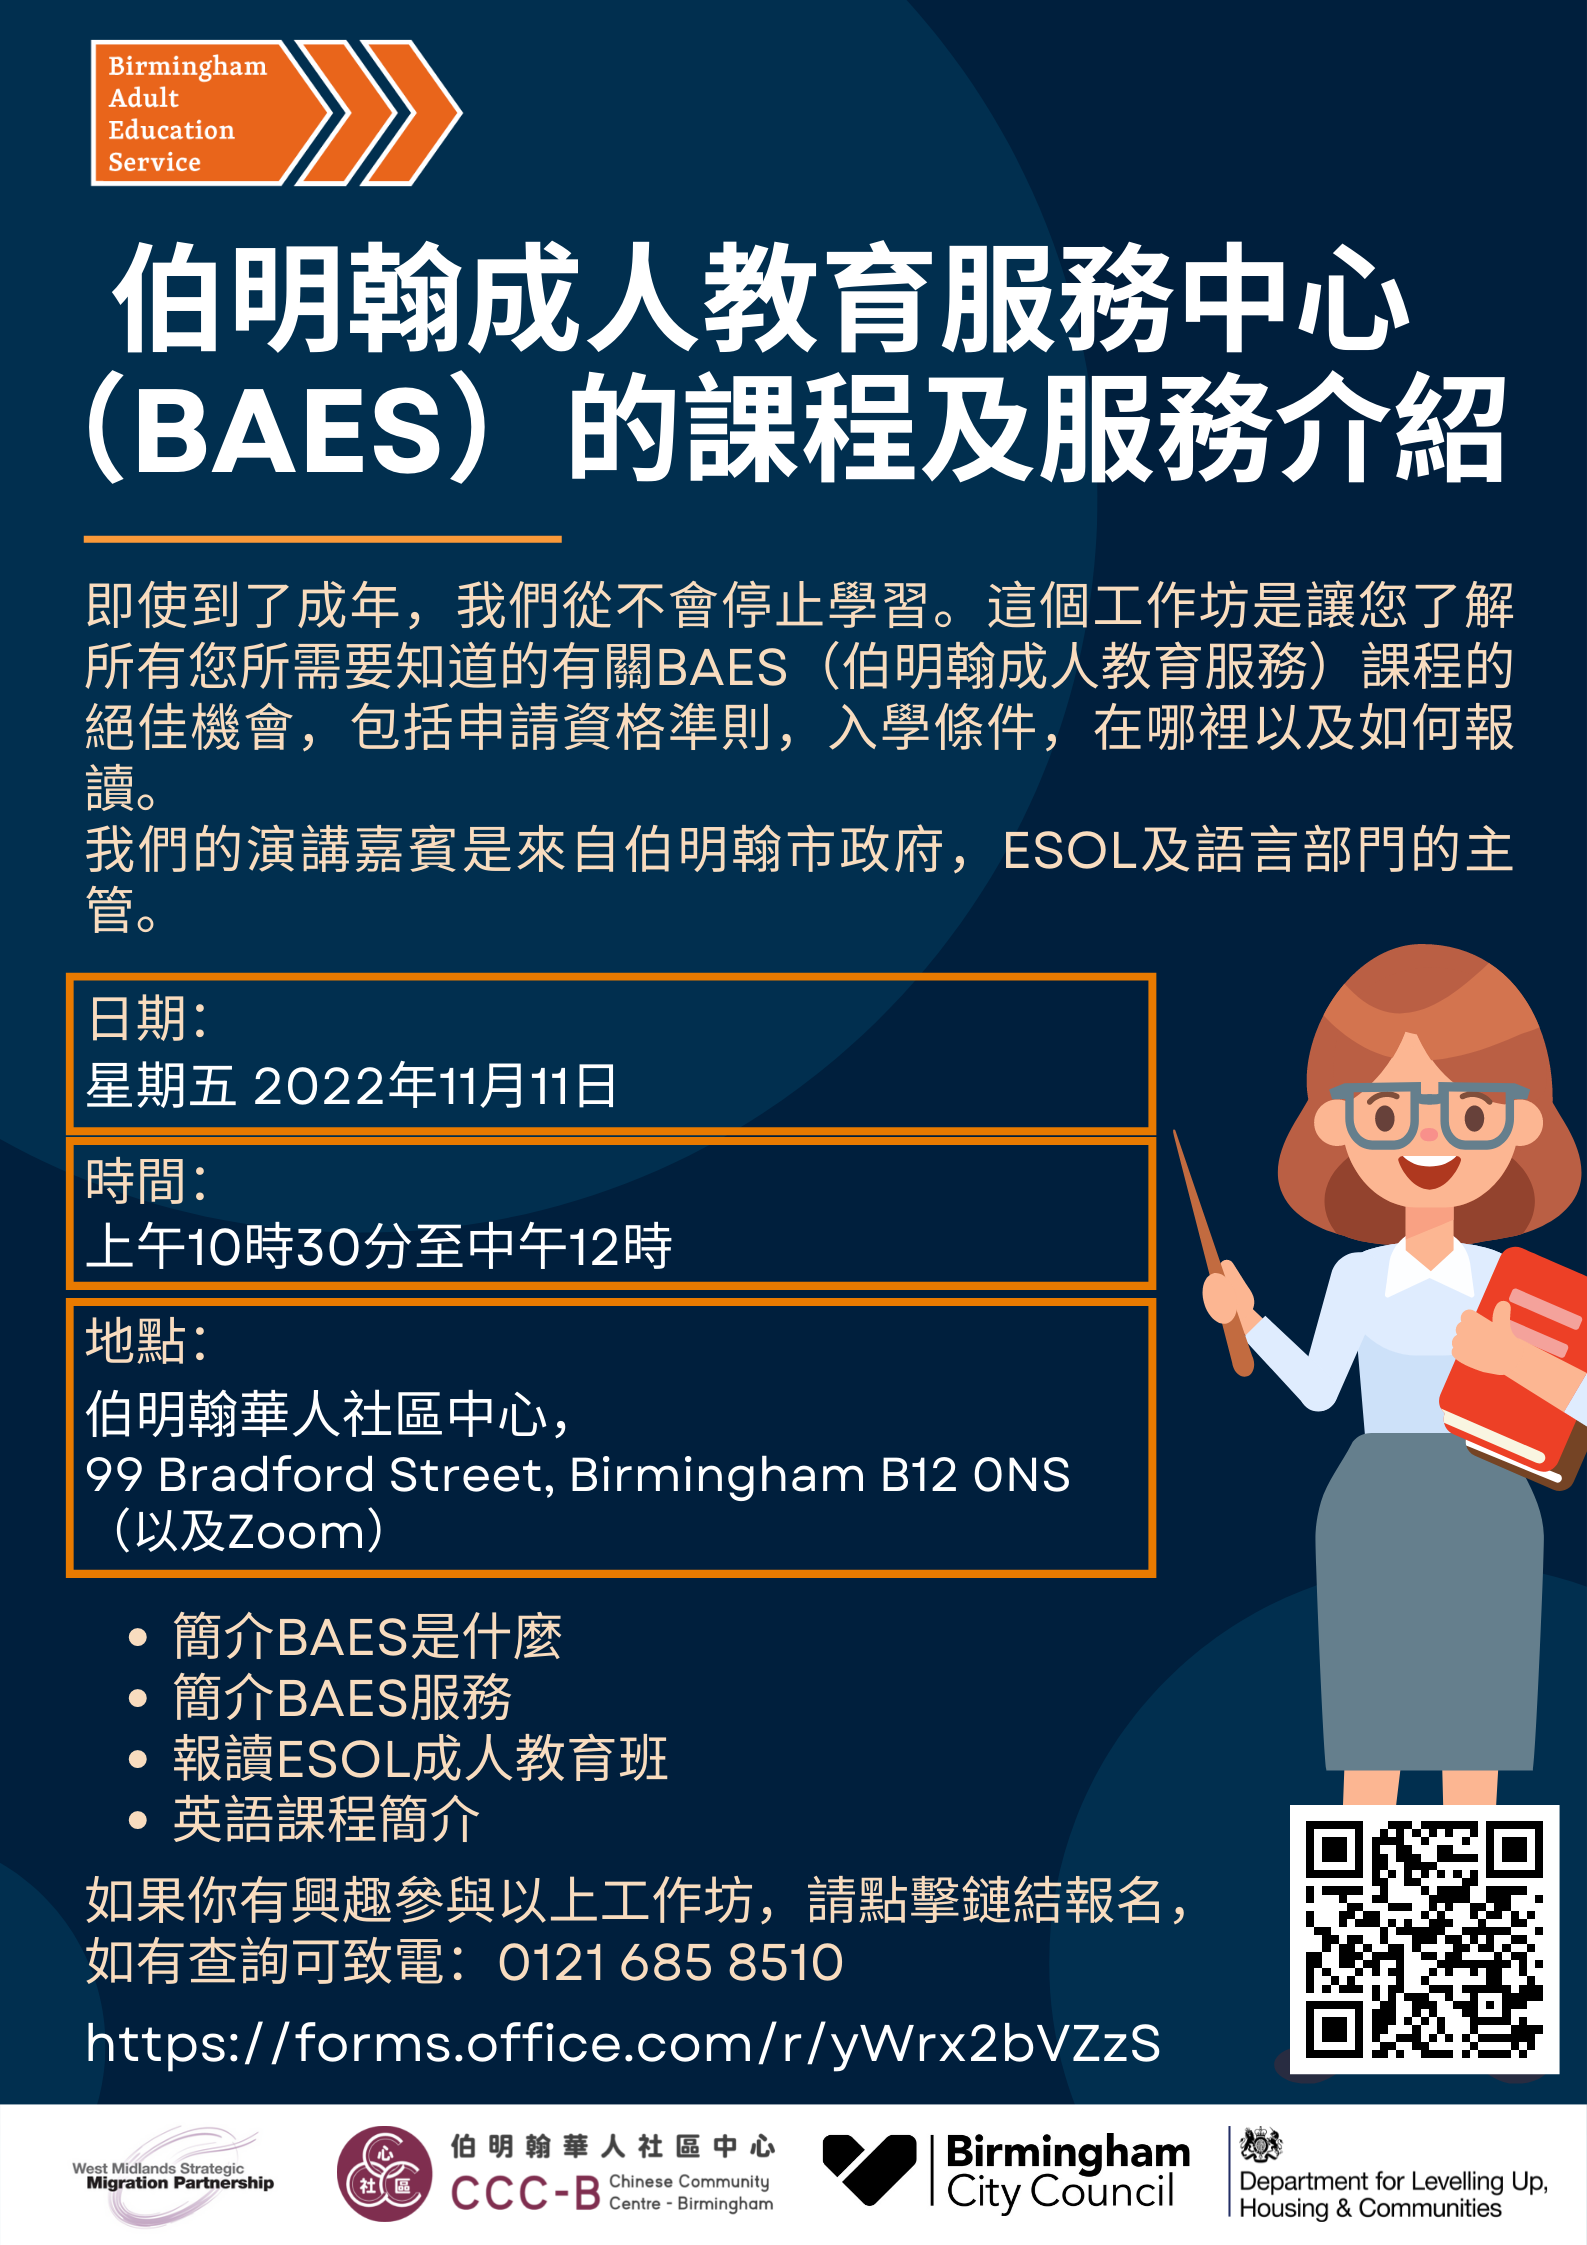 Learn about Courses and Services offered by Birmingham Adult Education Services (BAES) – 伯明翰成人教育服務中心（BAES）的課程及服務介紹